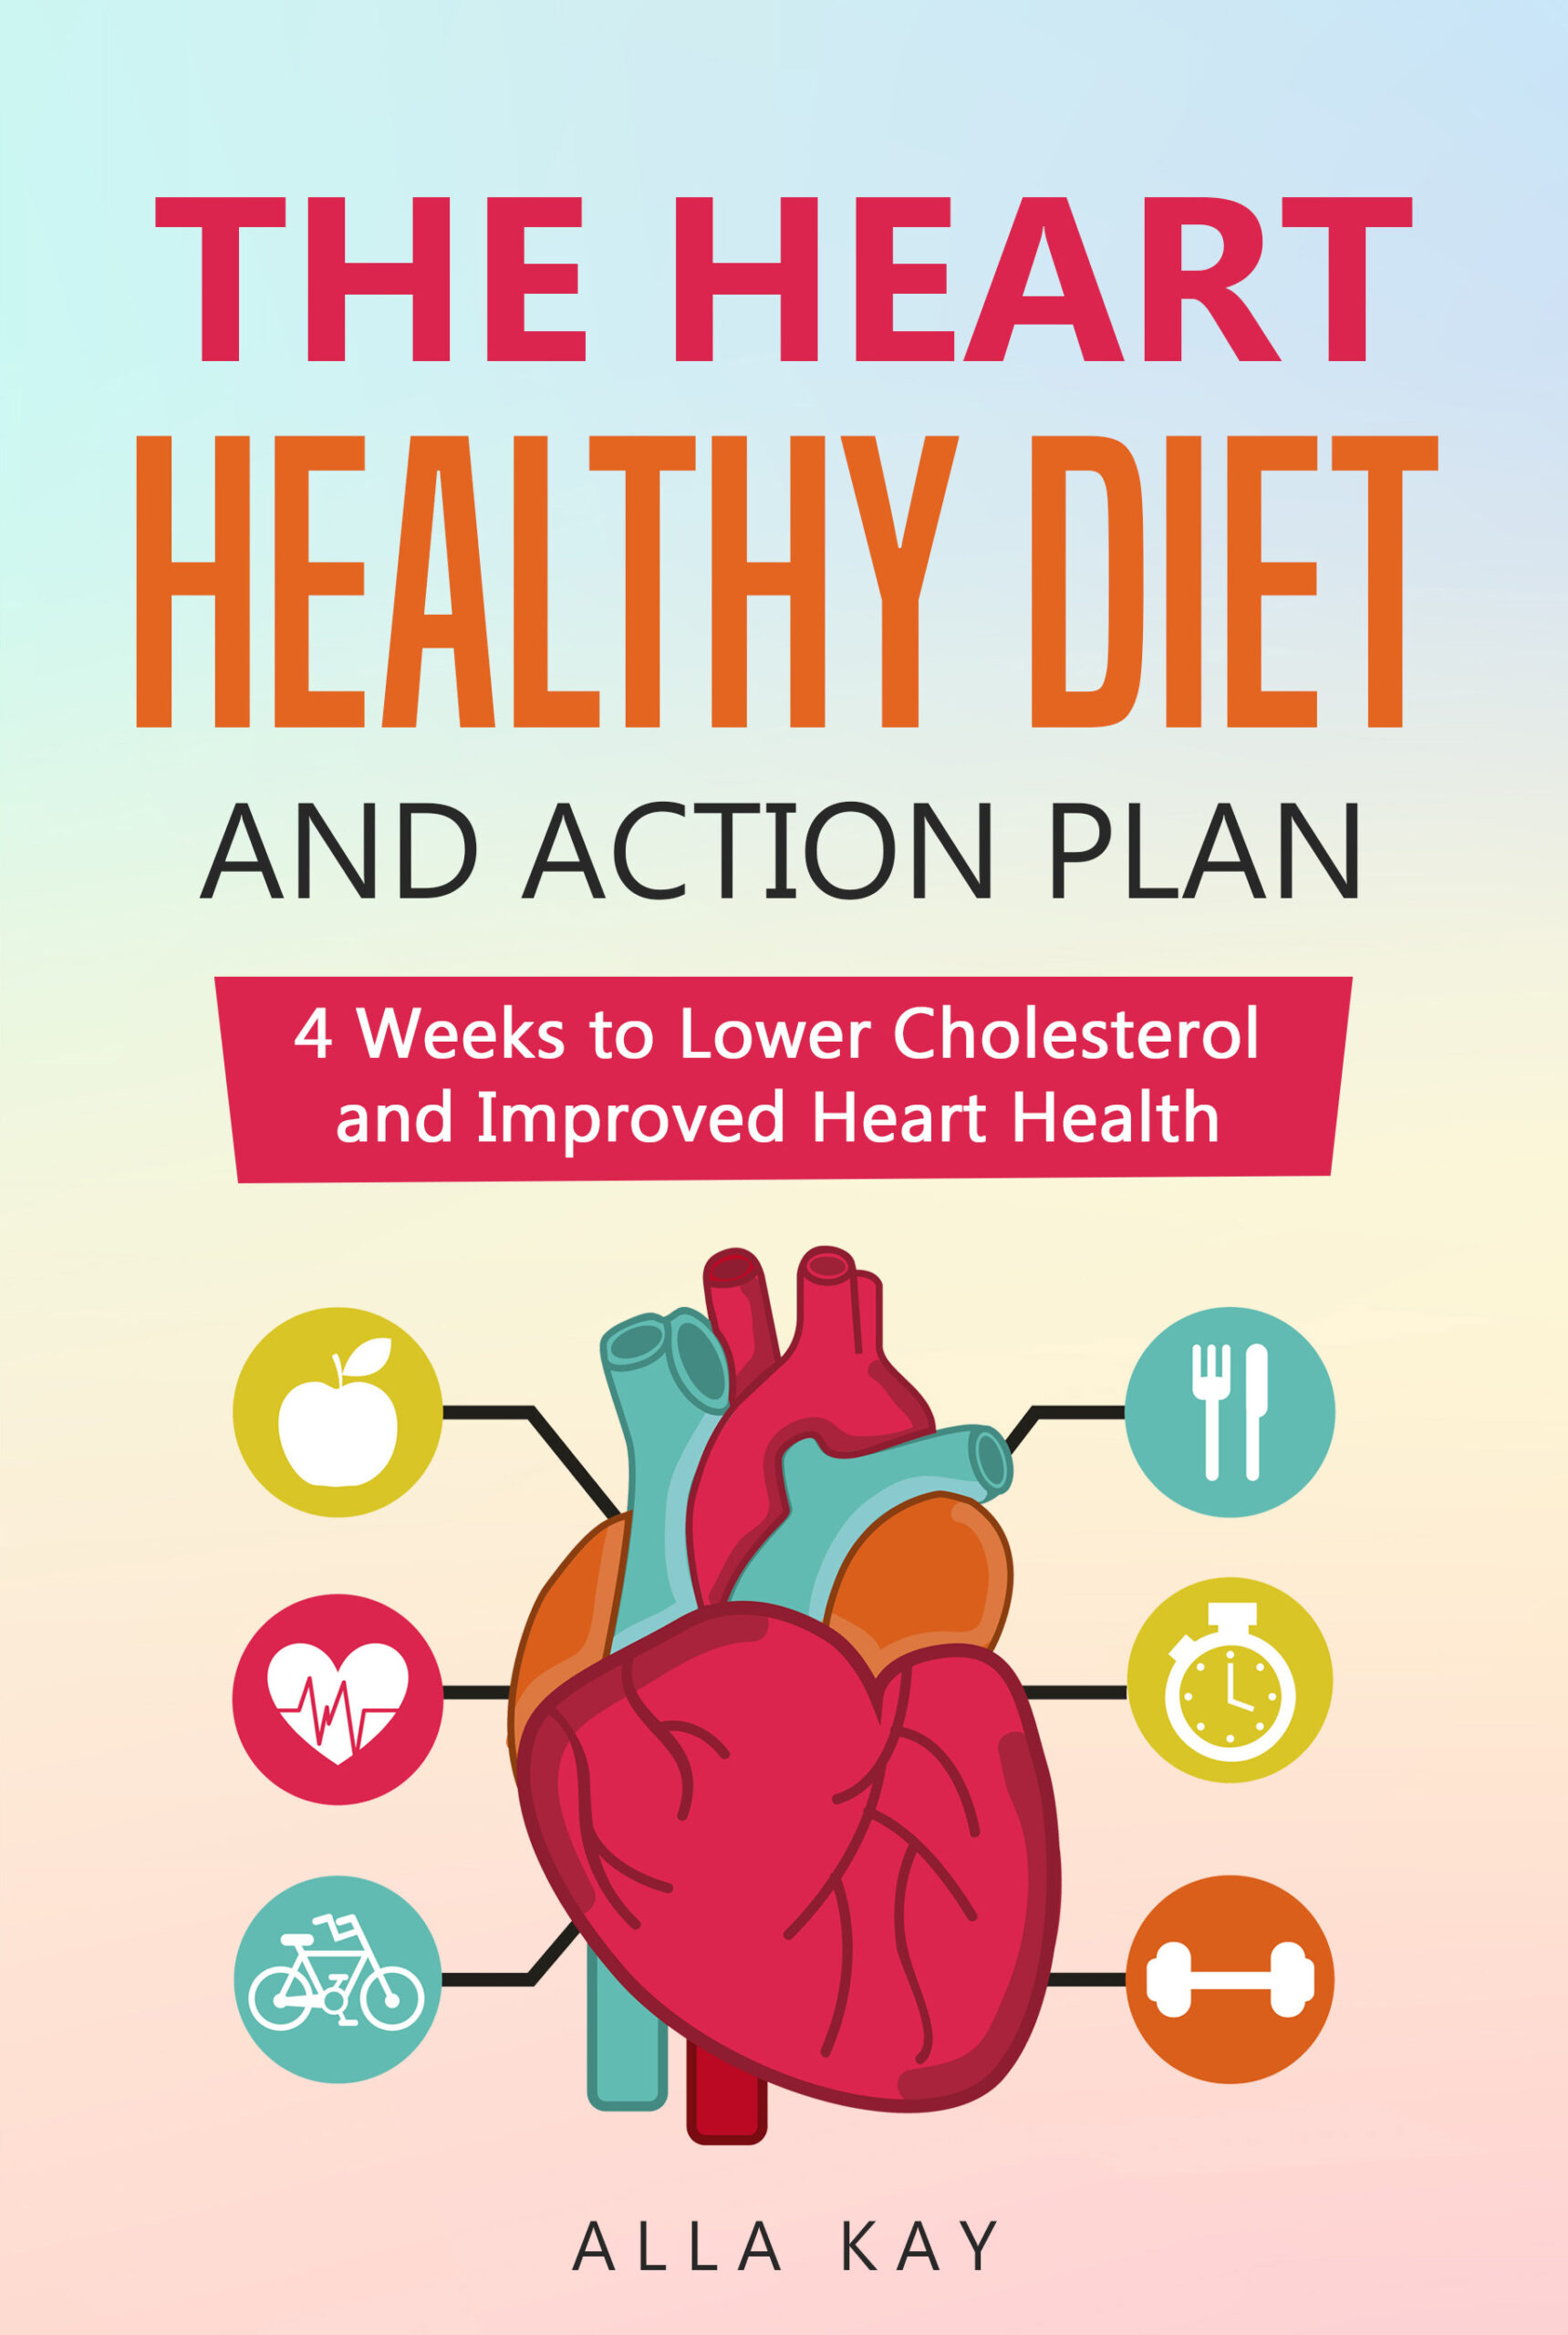 FREE: The Heart Healthy Diet and Action Plan: 4 Weeks to Lower Cholesterol and Improved Heart Health (menu for a month: breakfast, lunch, dinner, snaсk) by Alla KAy